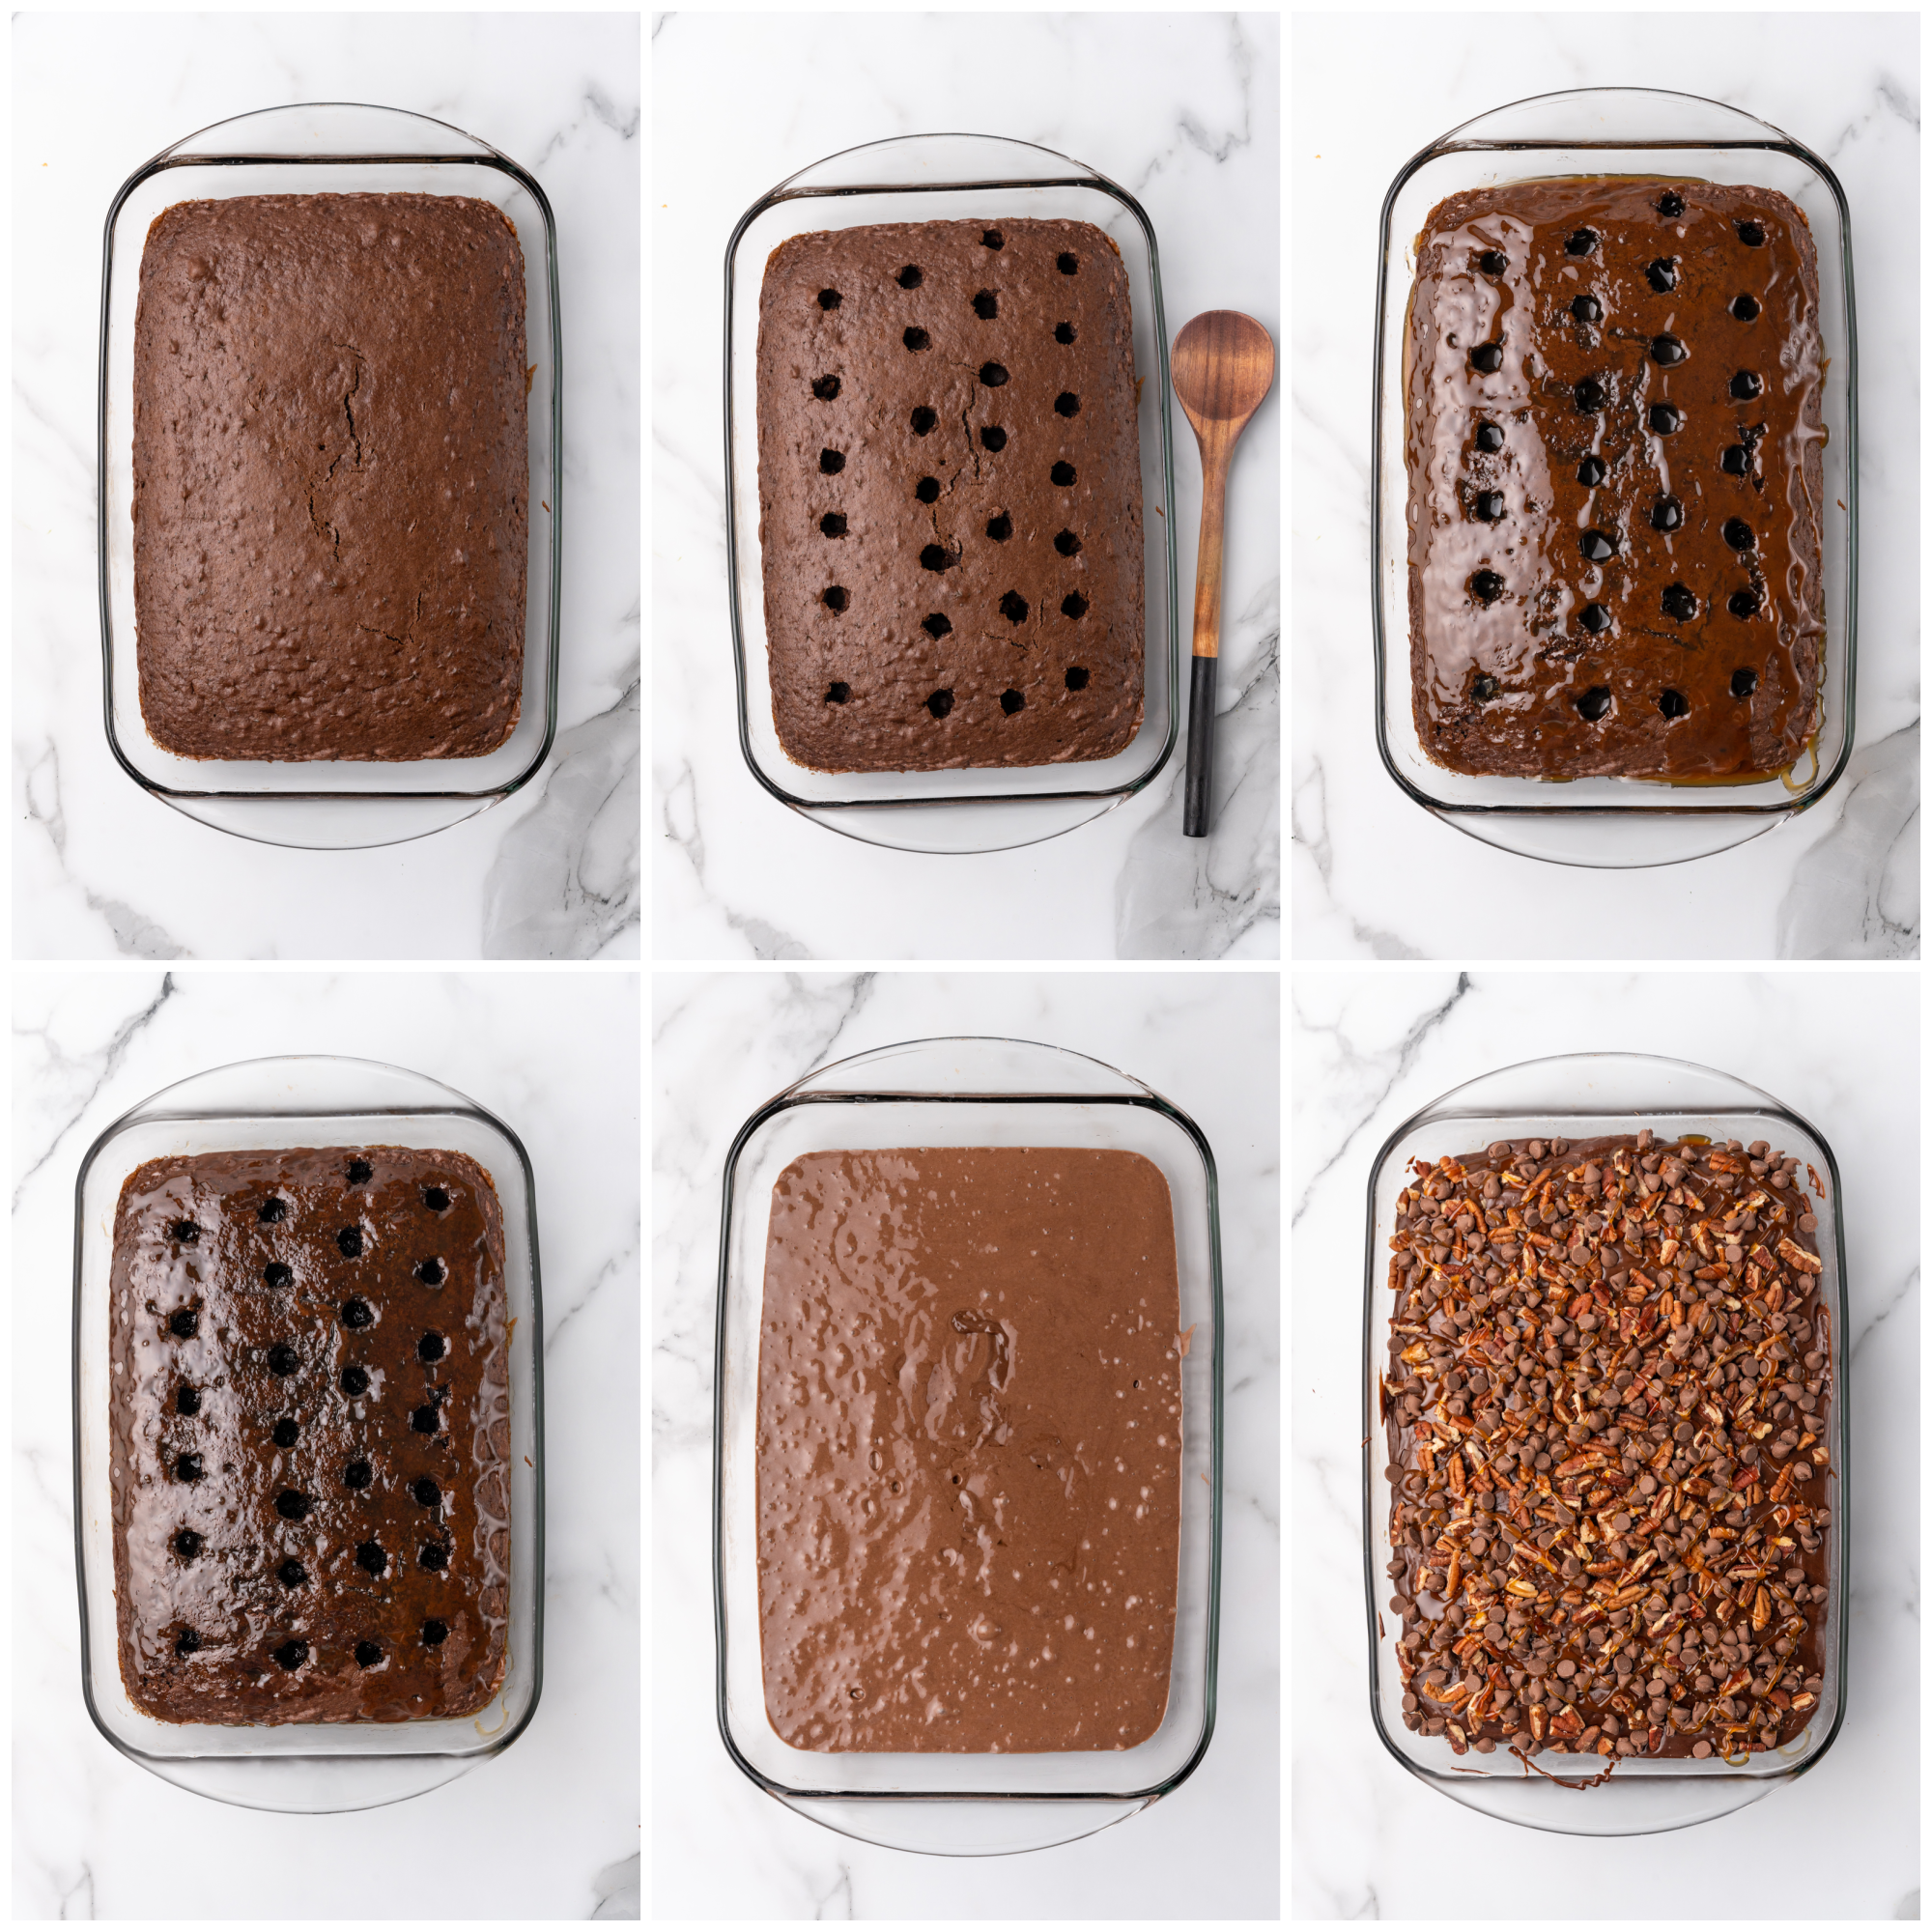 A collage images showing the steps needed to make this recipe.